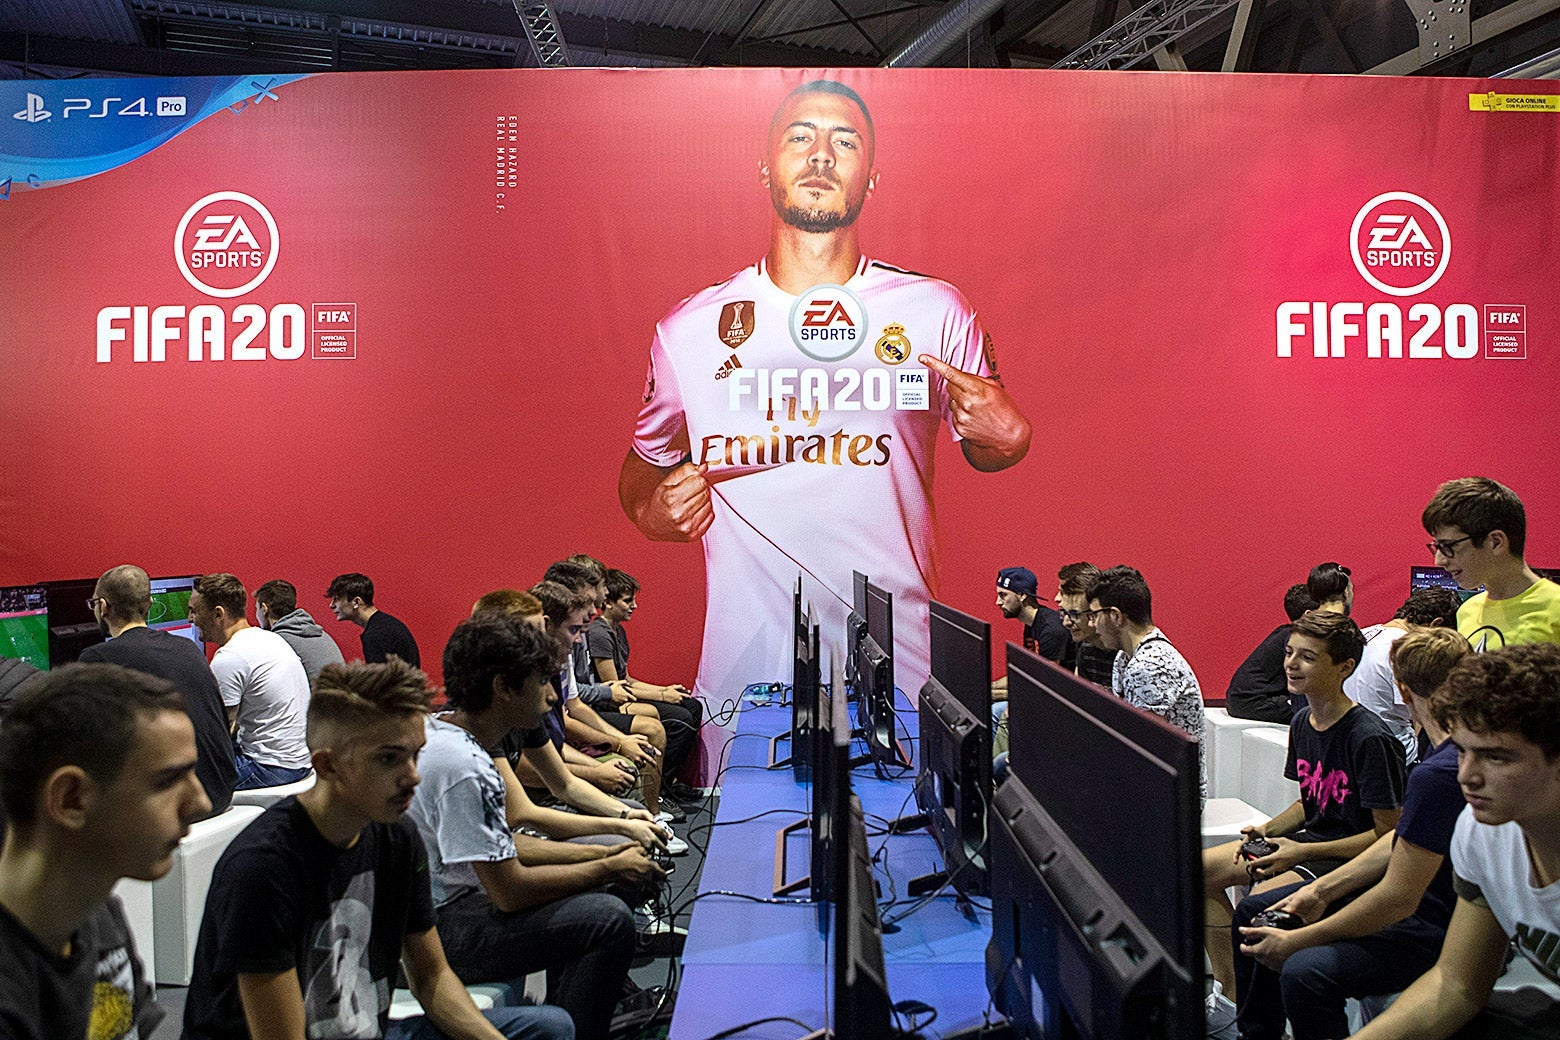 Gamers sit at rows of computers. A picture of a FIFA player along with the FIFA and EA logos is seen over them.